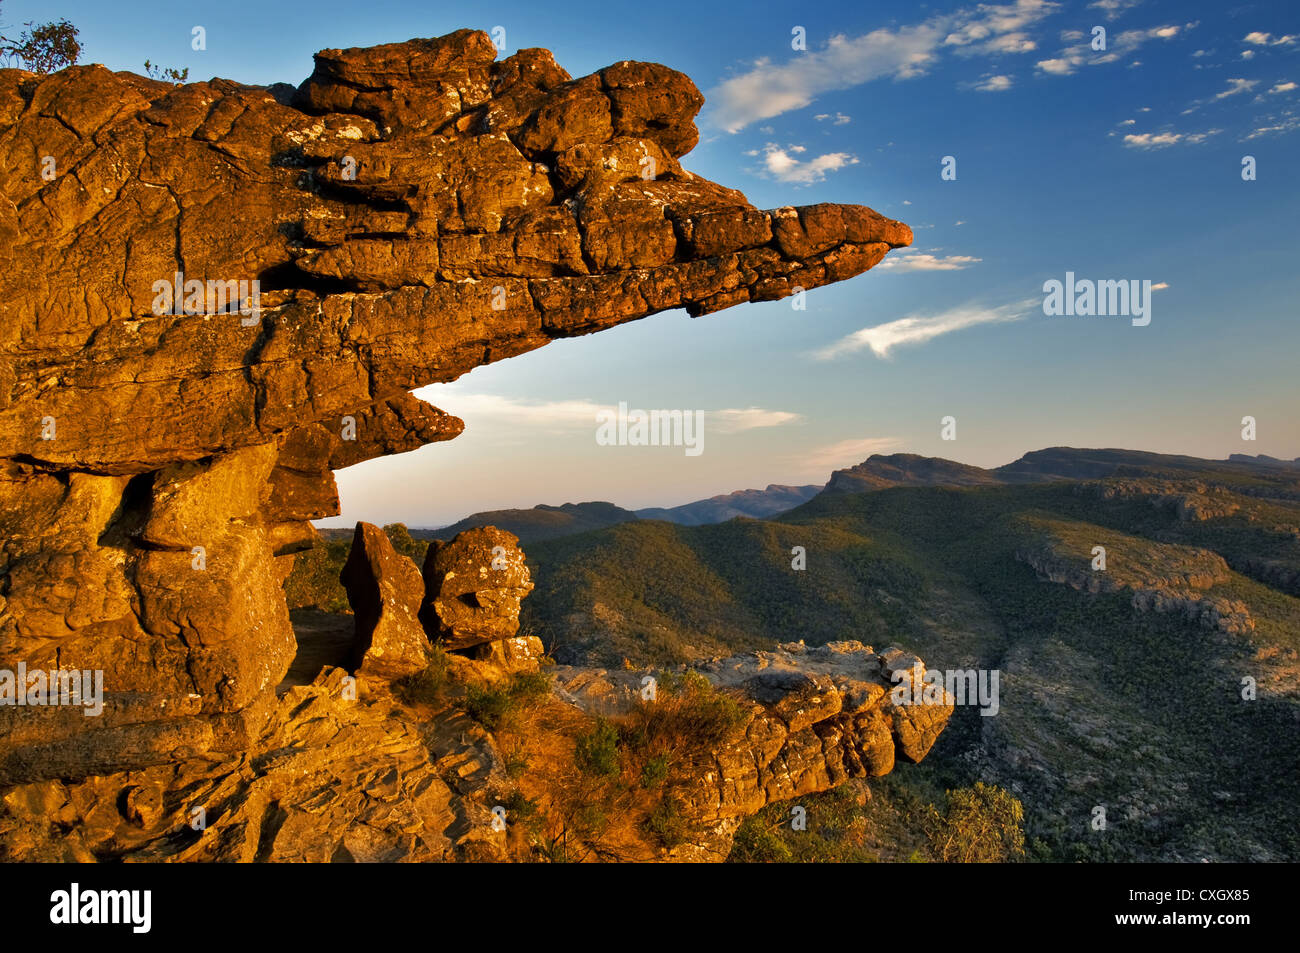 The rock formation of the Balconies in Grampians national Park. Stock Photo